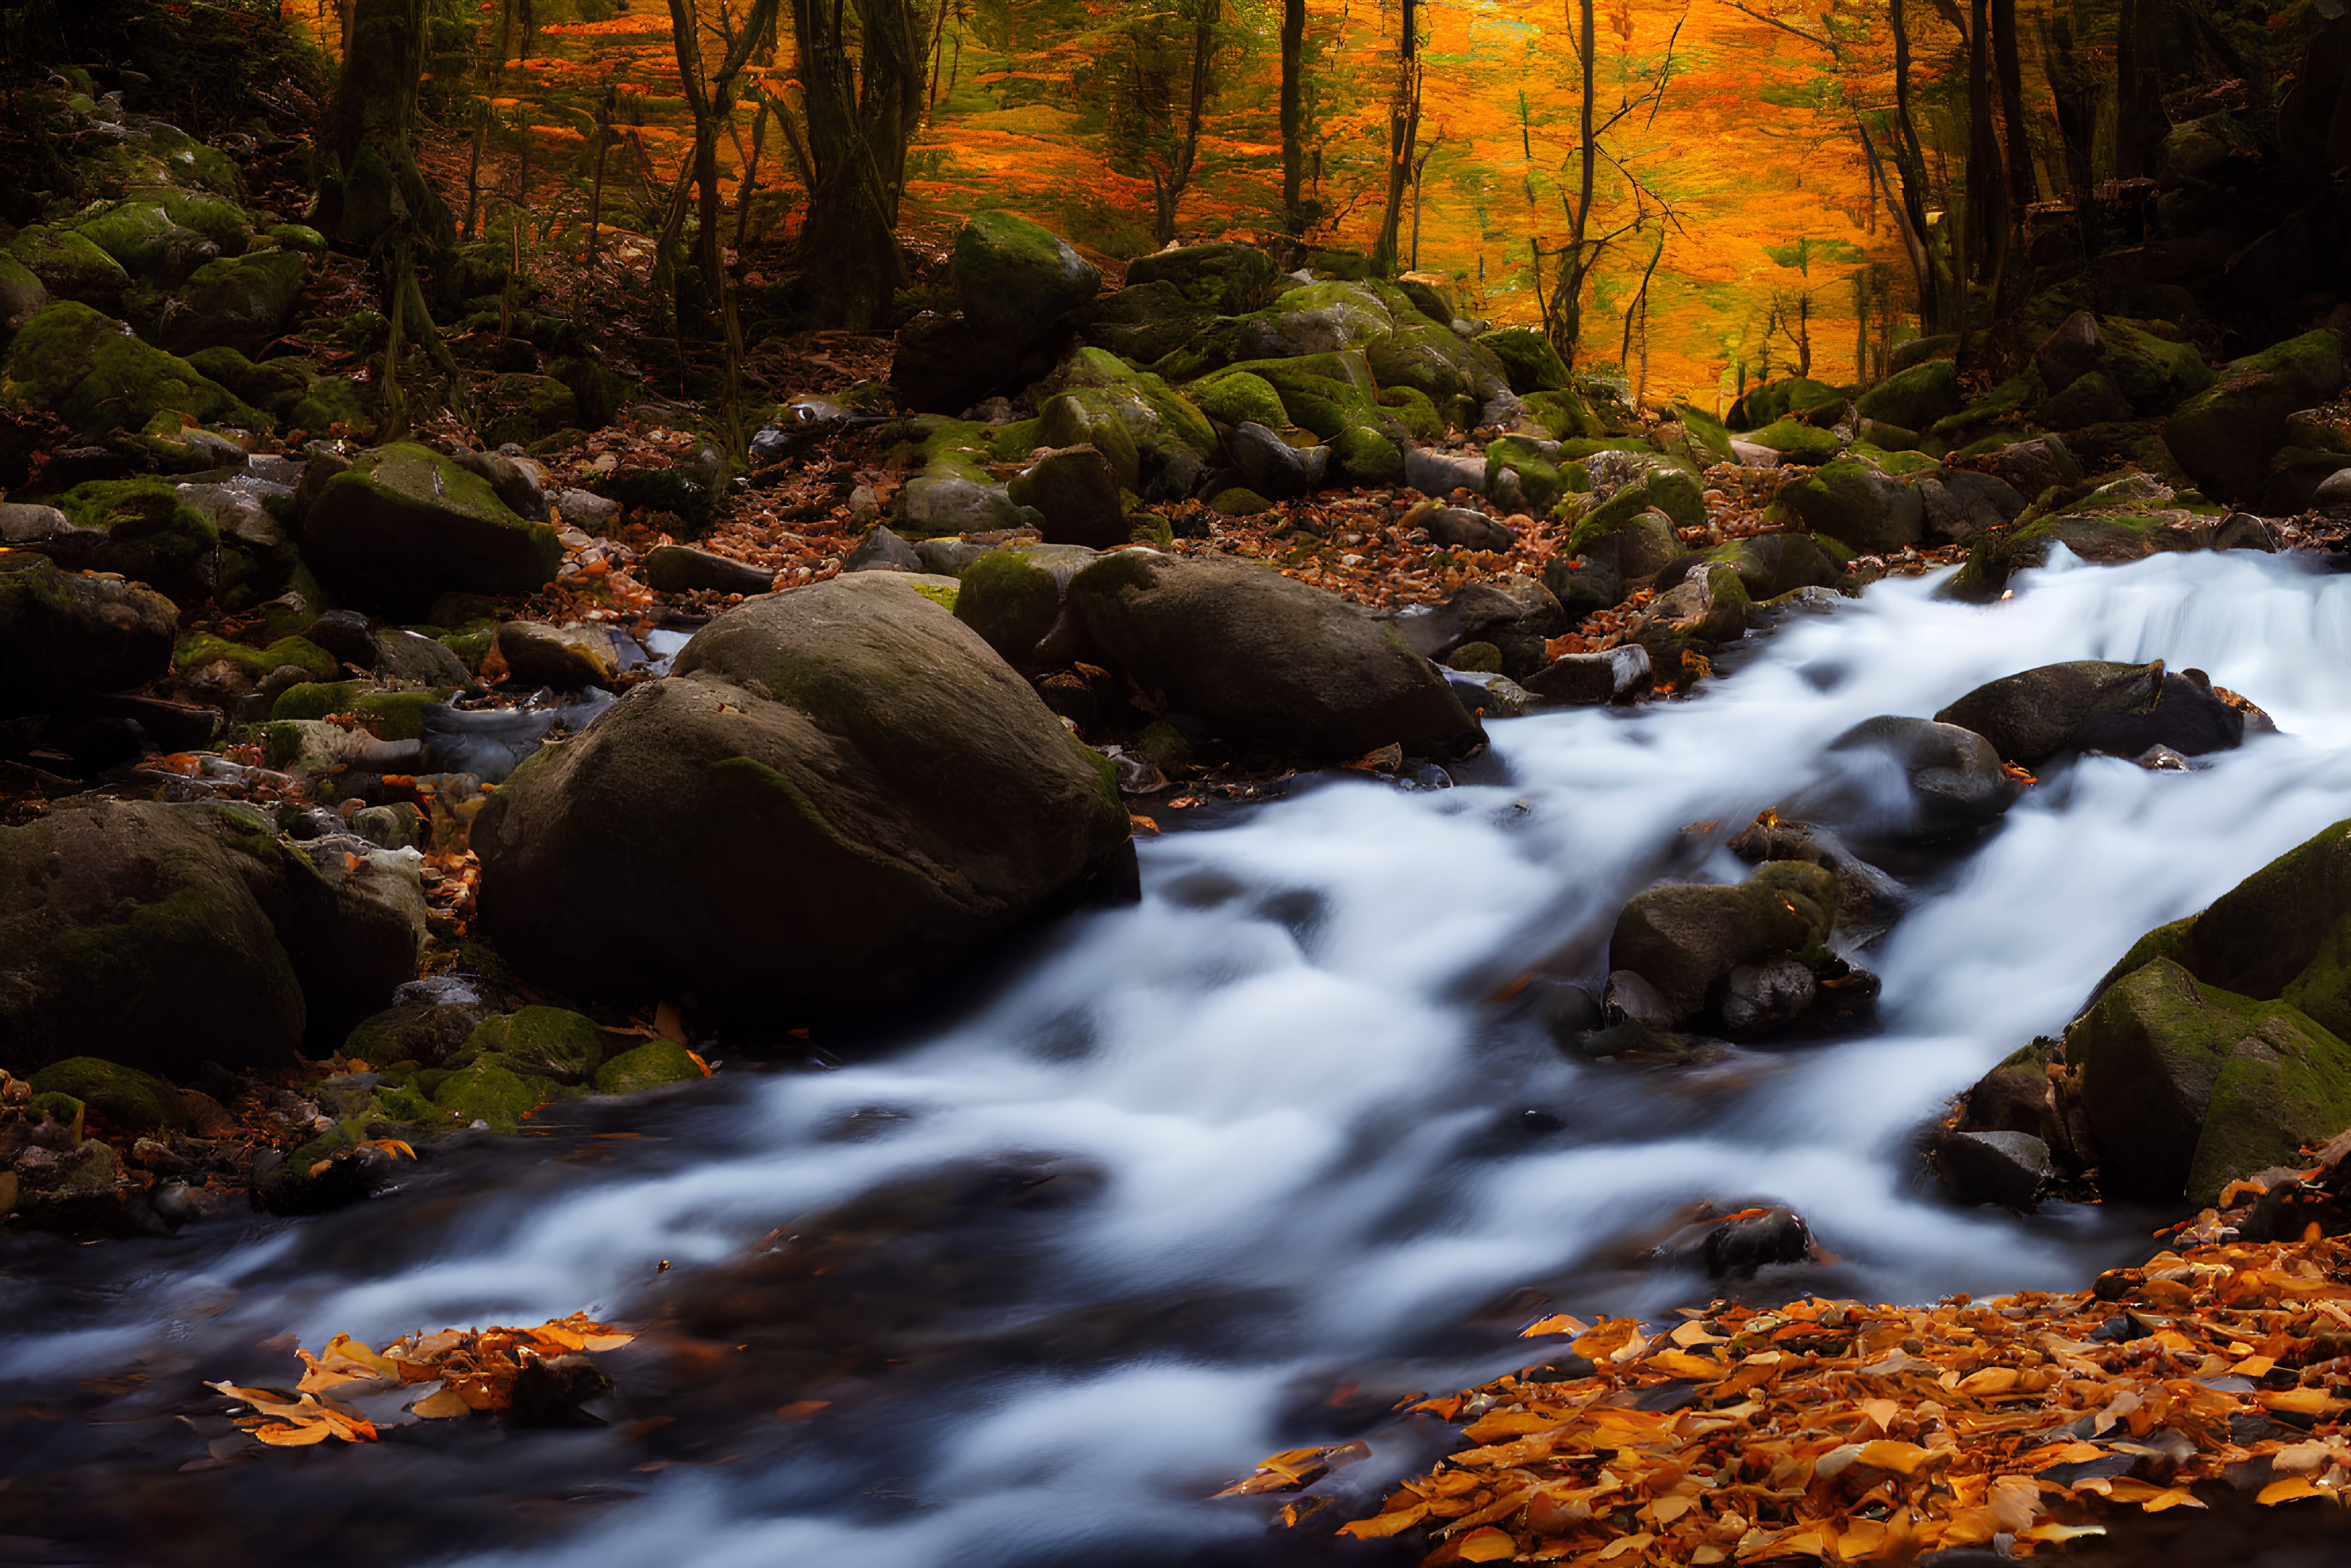 Tranquil forest stream with autumn leaves and vibrant orange trees